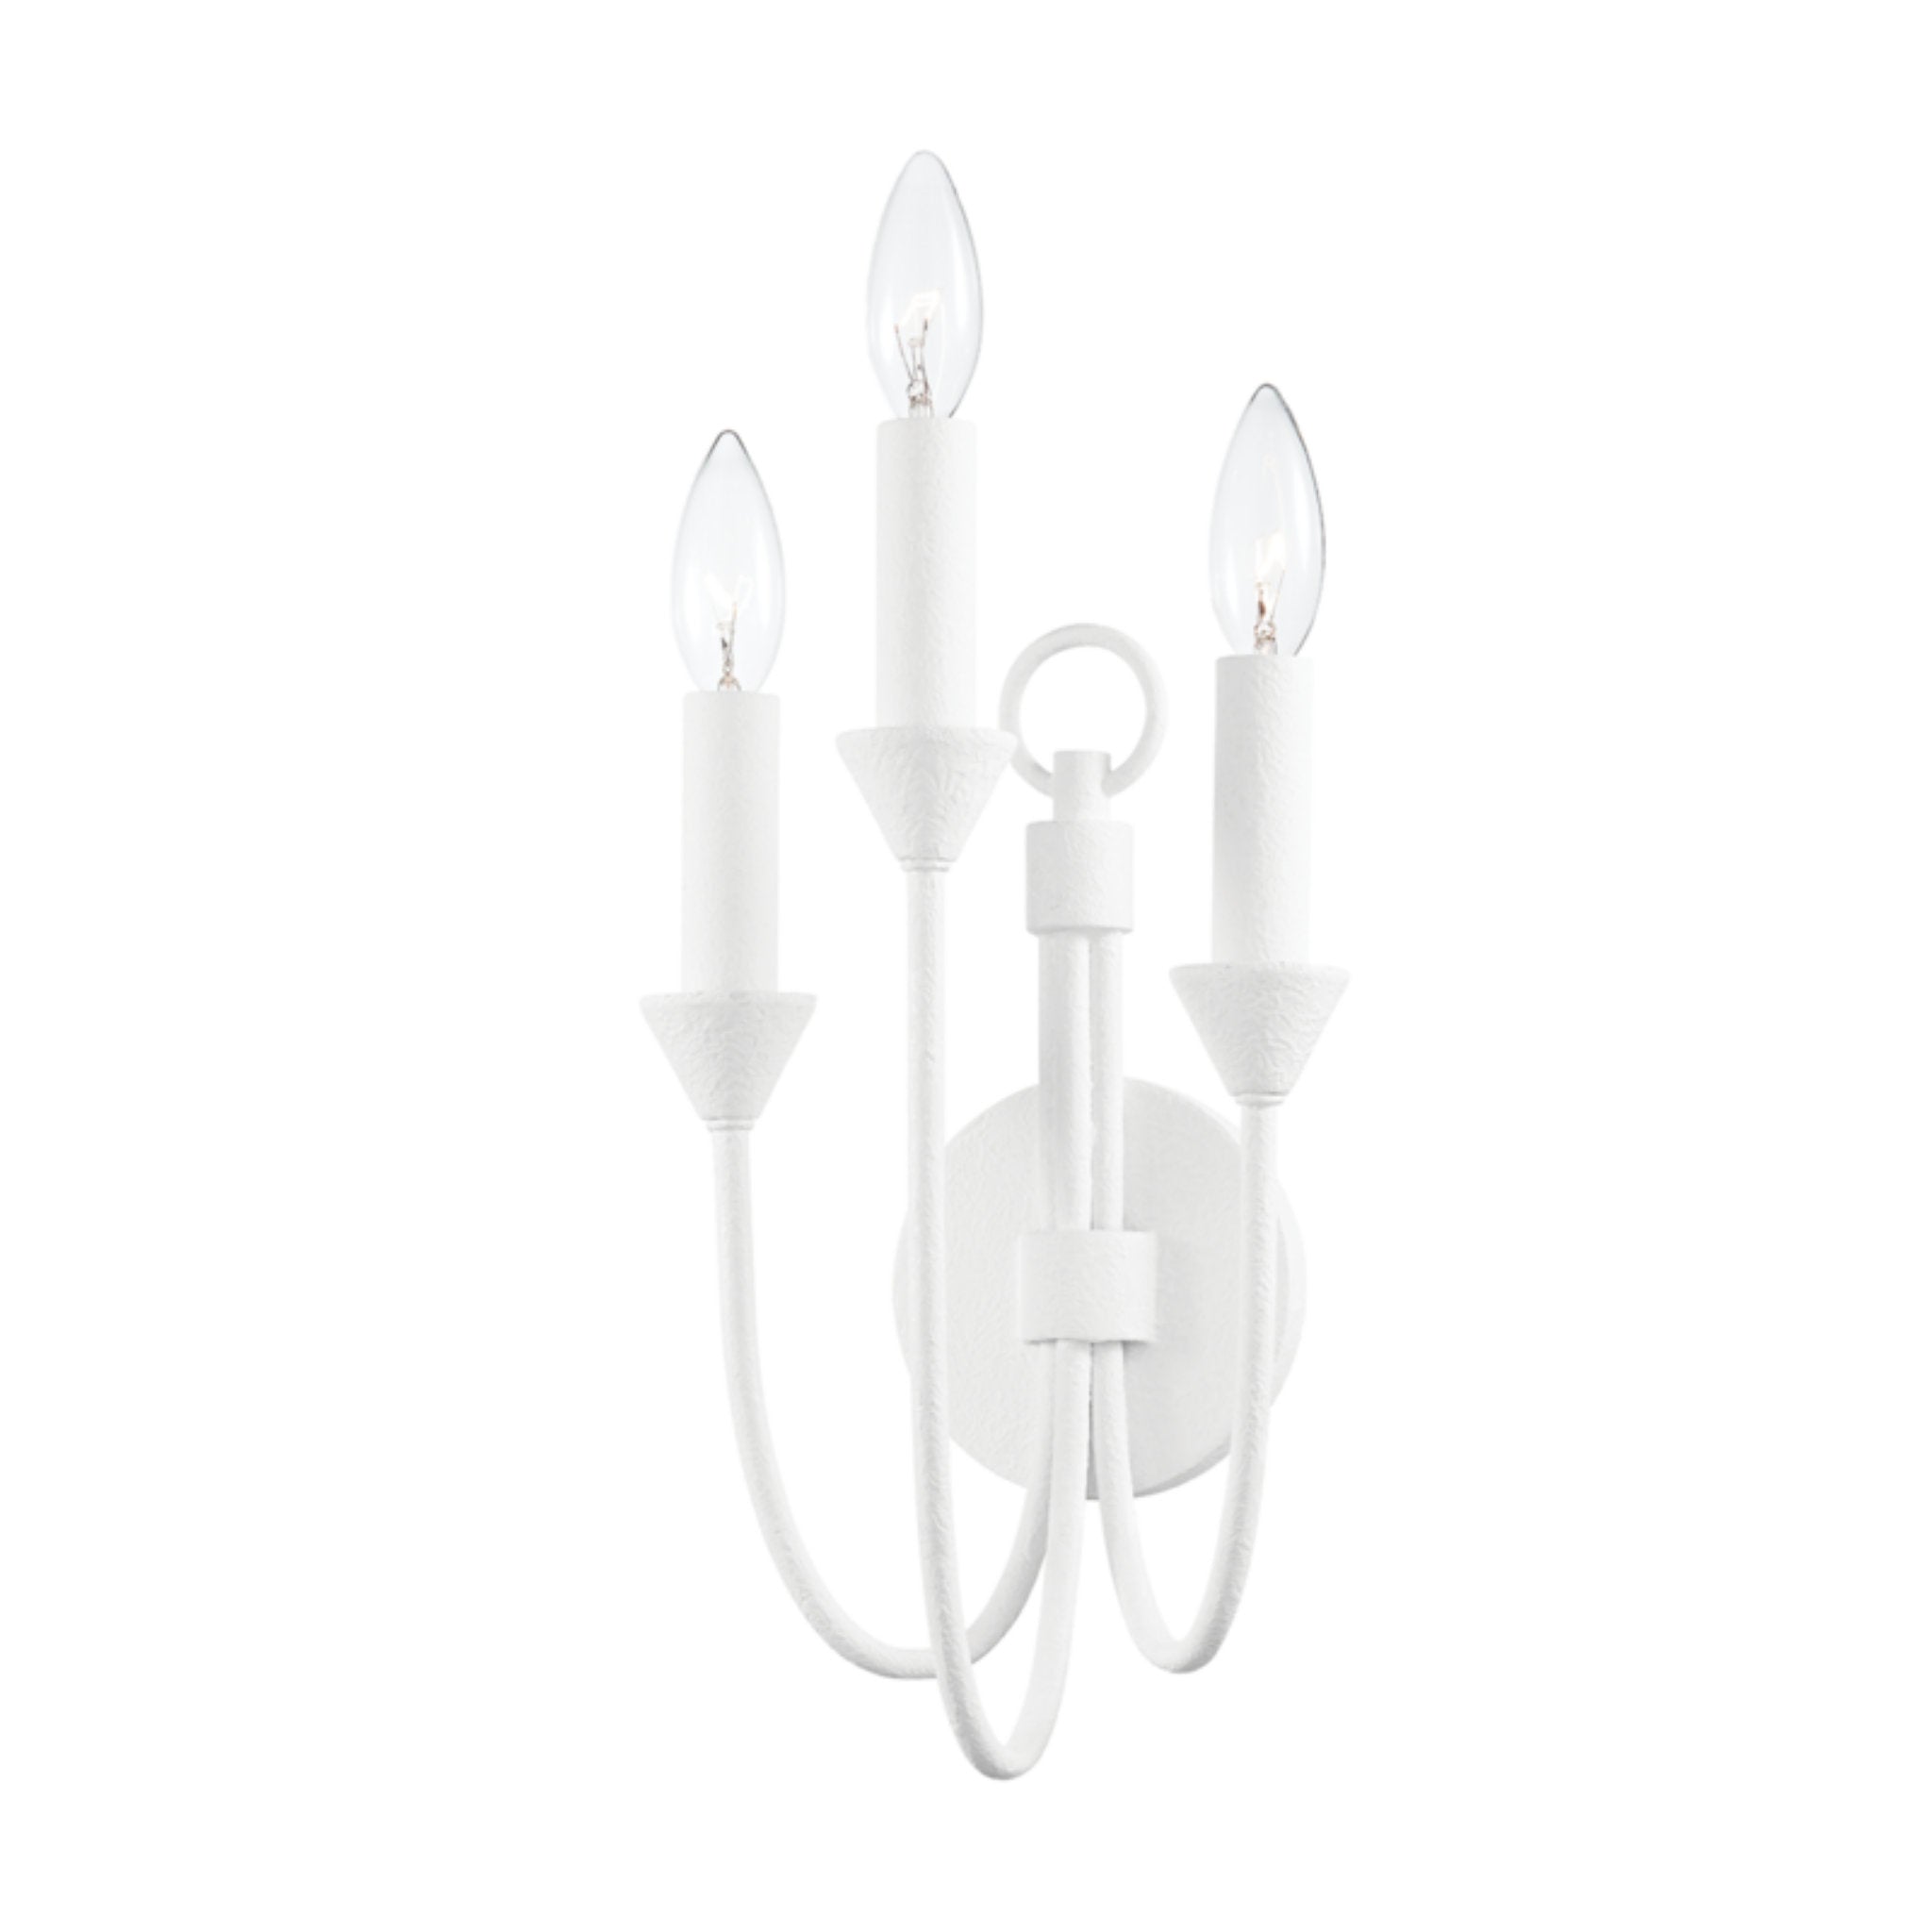 Cate 3 Light Wall Sconce in Gesso White